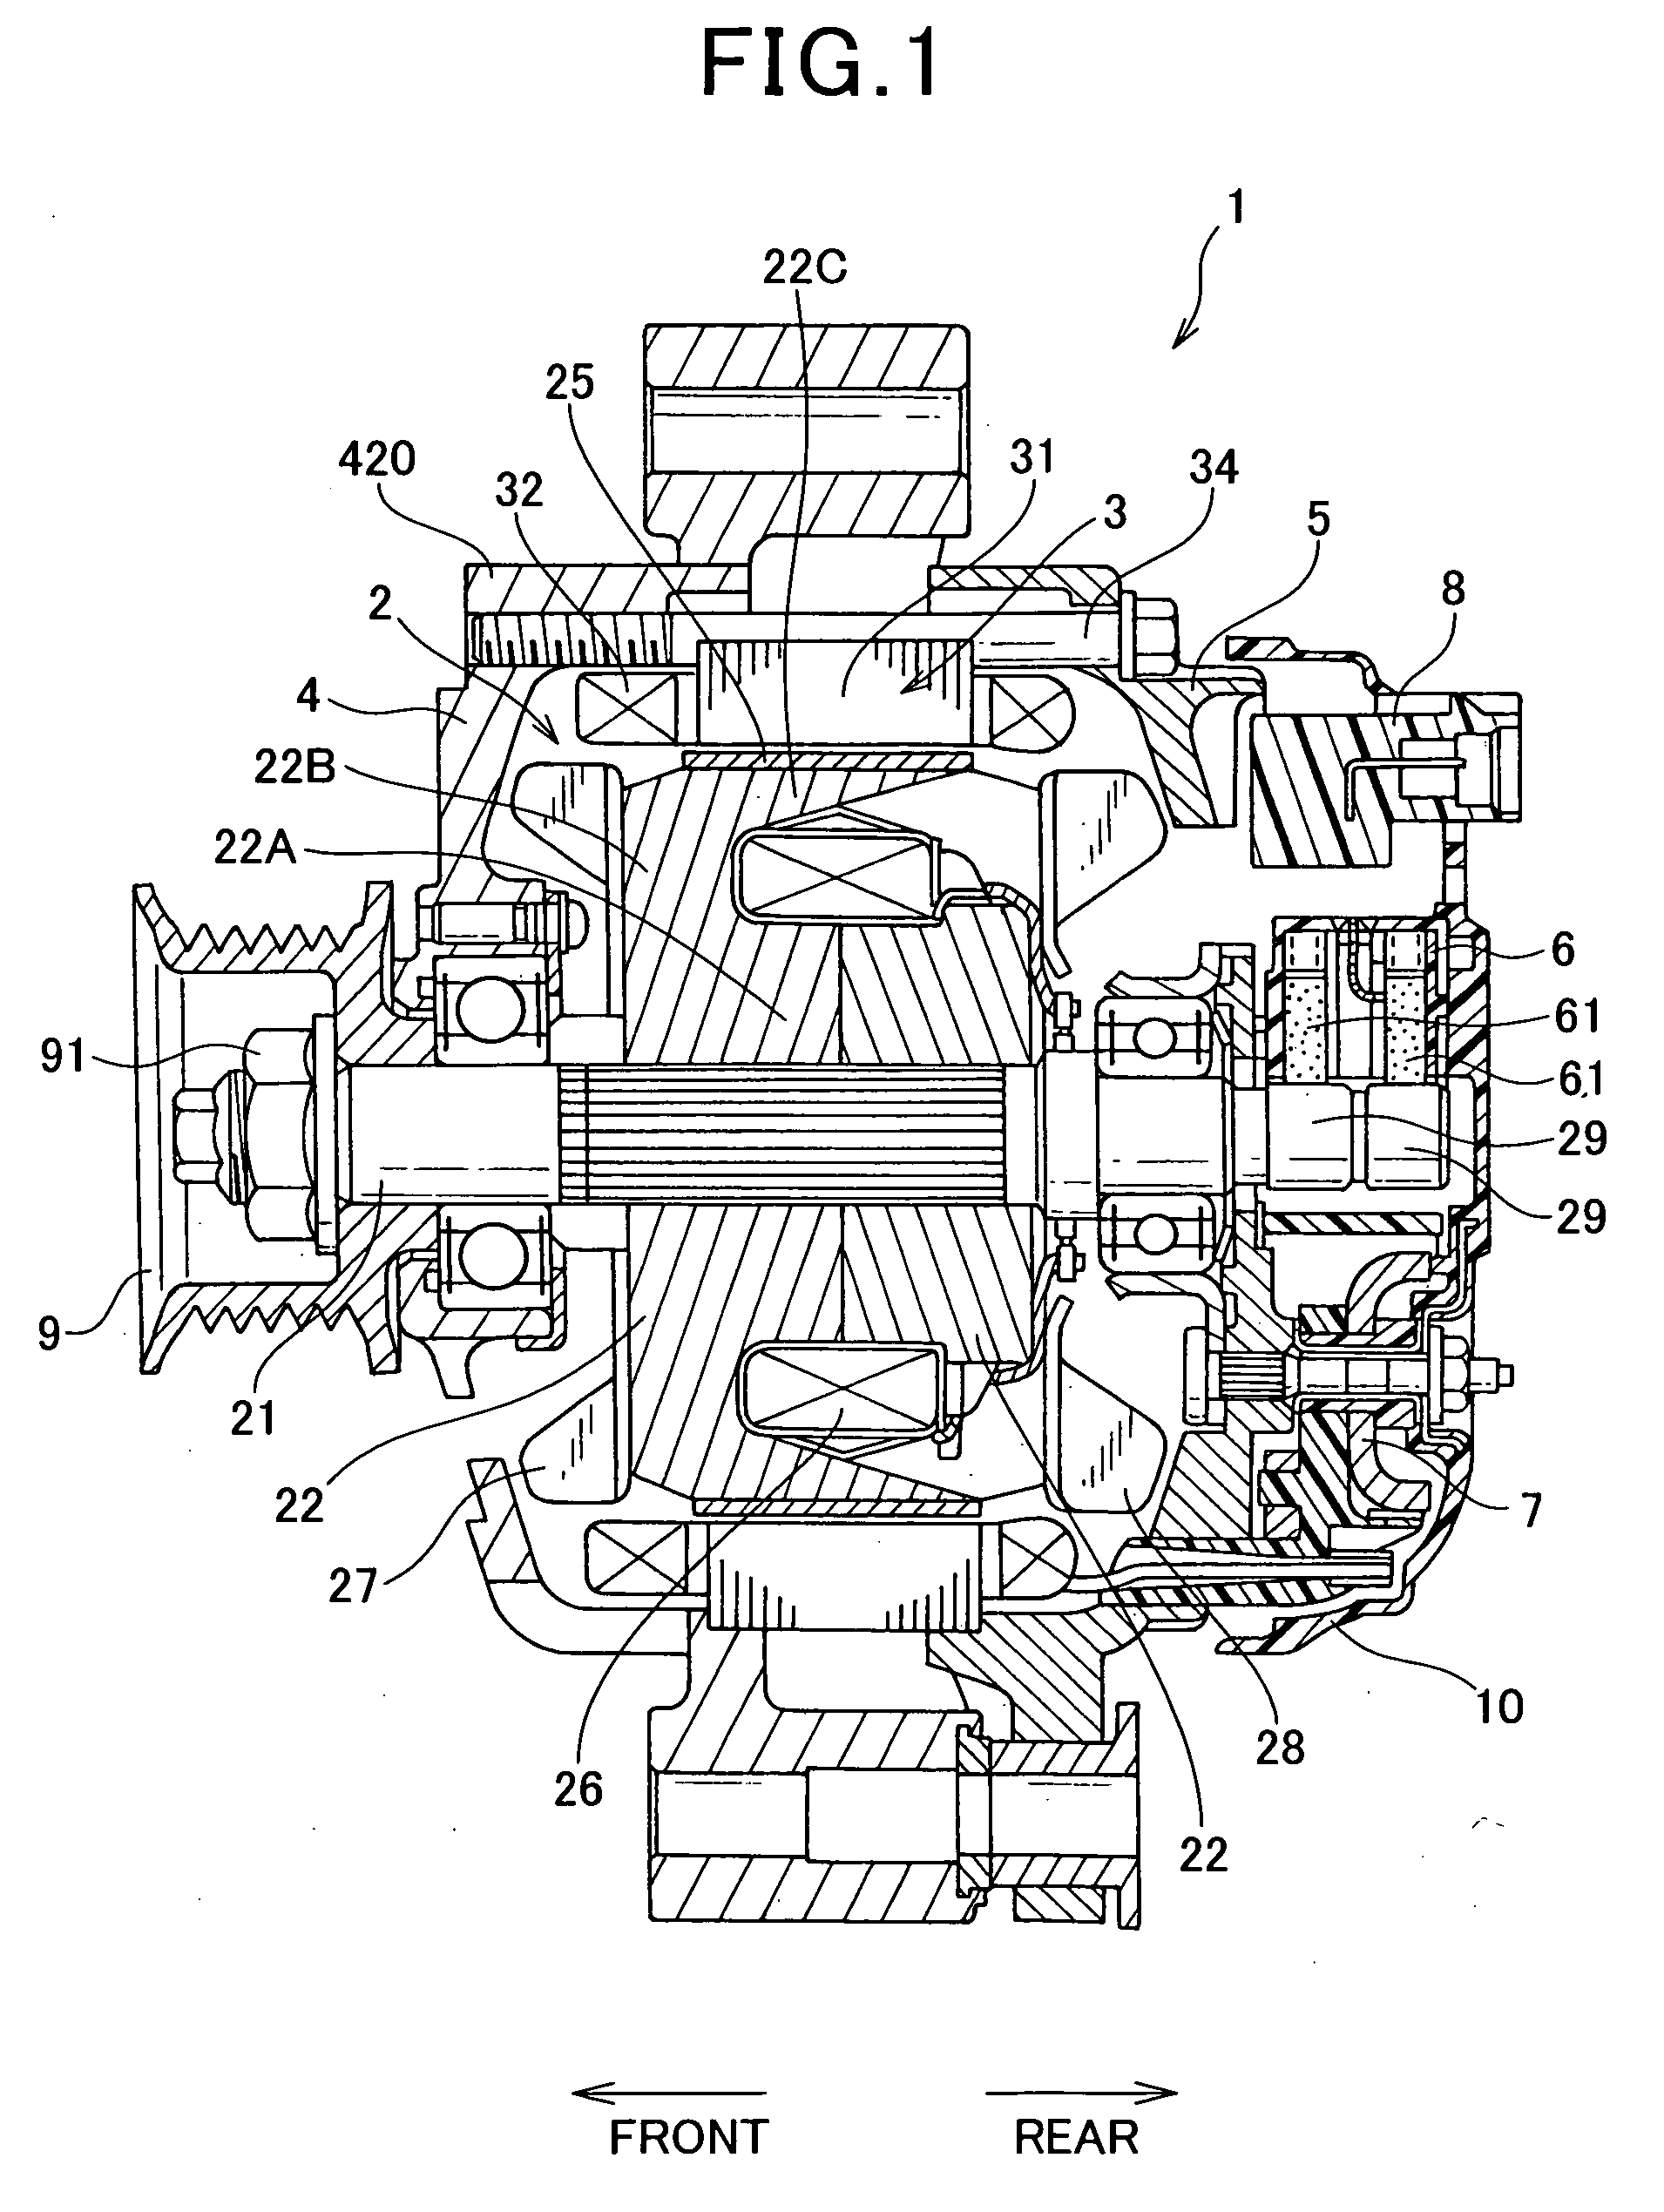 Automotive alternator including annular core having protrusions and recesses alternately formed on its outer surface